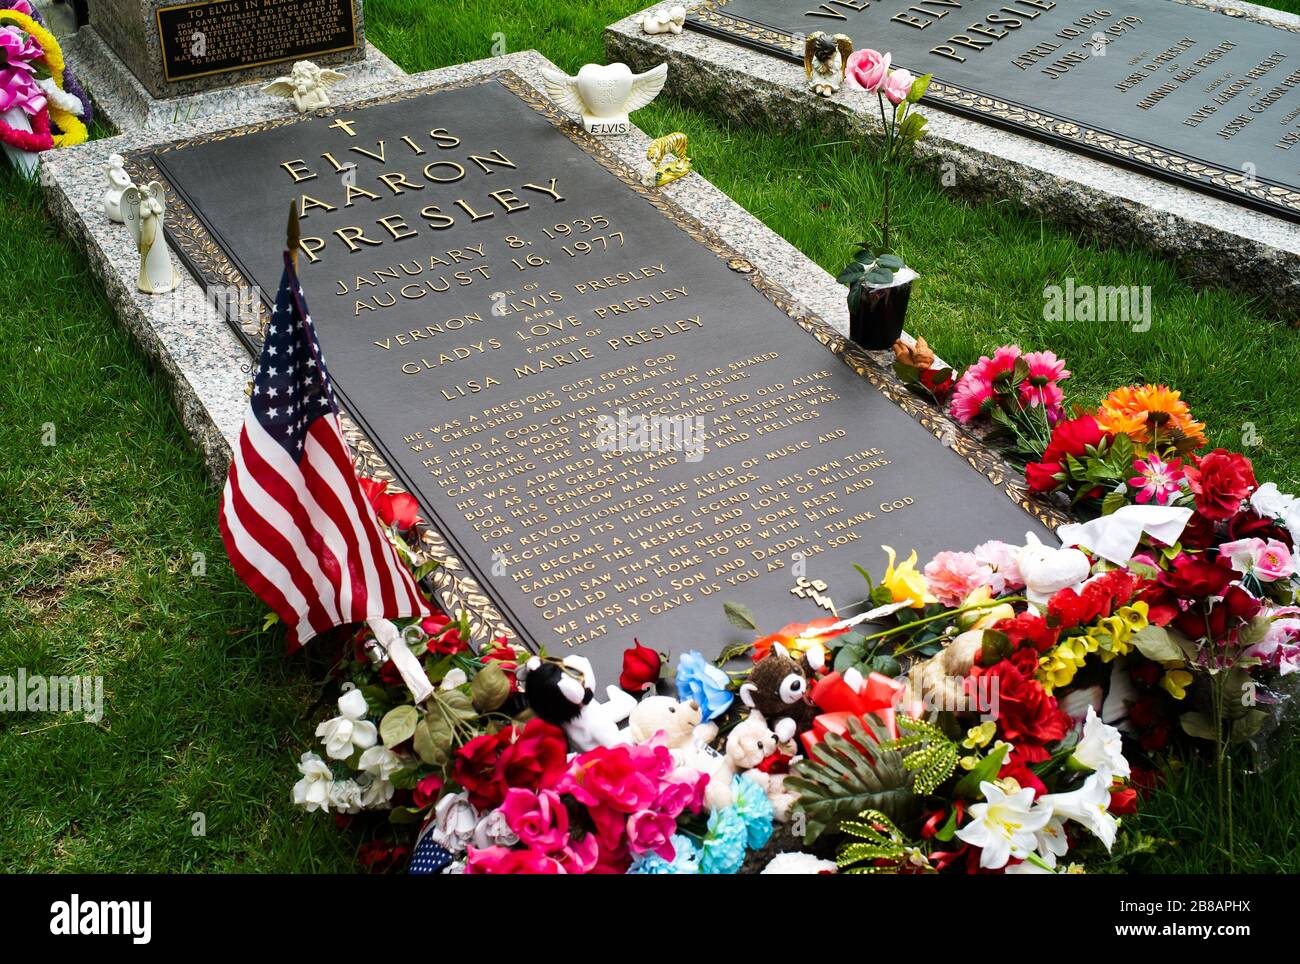 Memphis, Tennessee, United States - July 21 2009: The Grave of Elvis Presley in Graceland decorated with Flowers and a Flag. Stock Photo